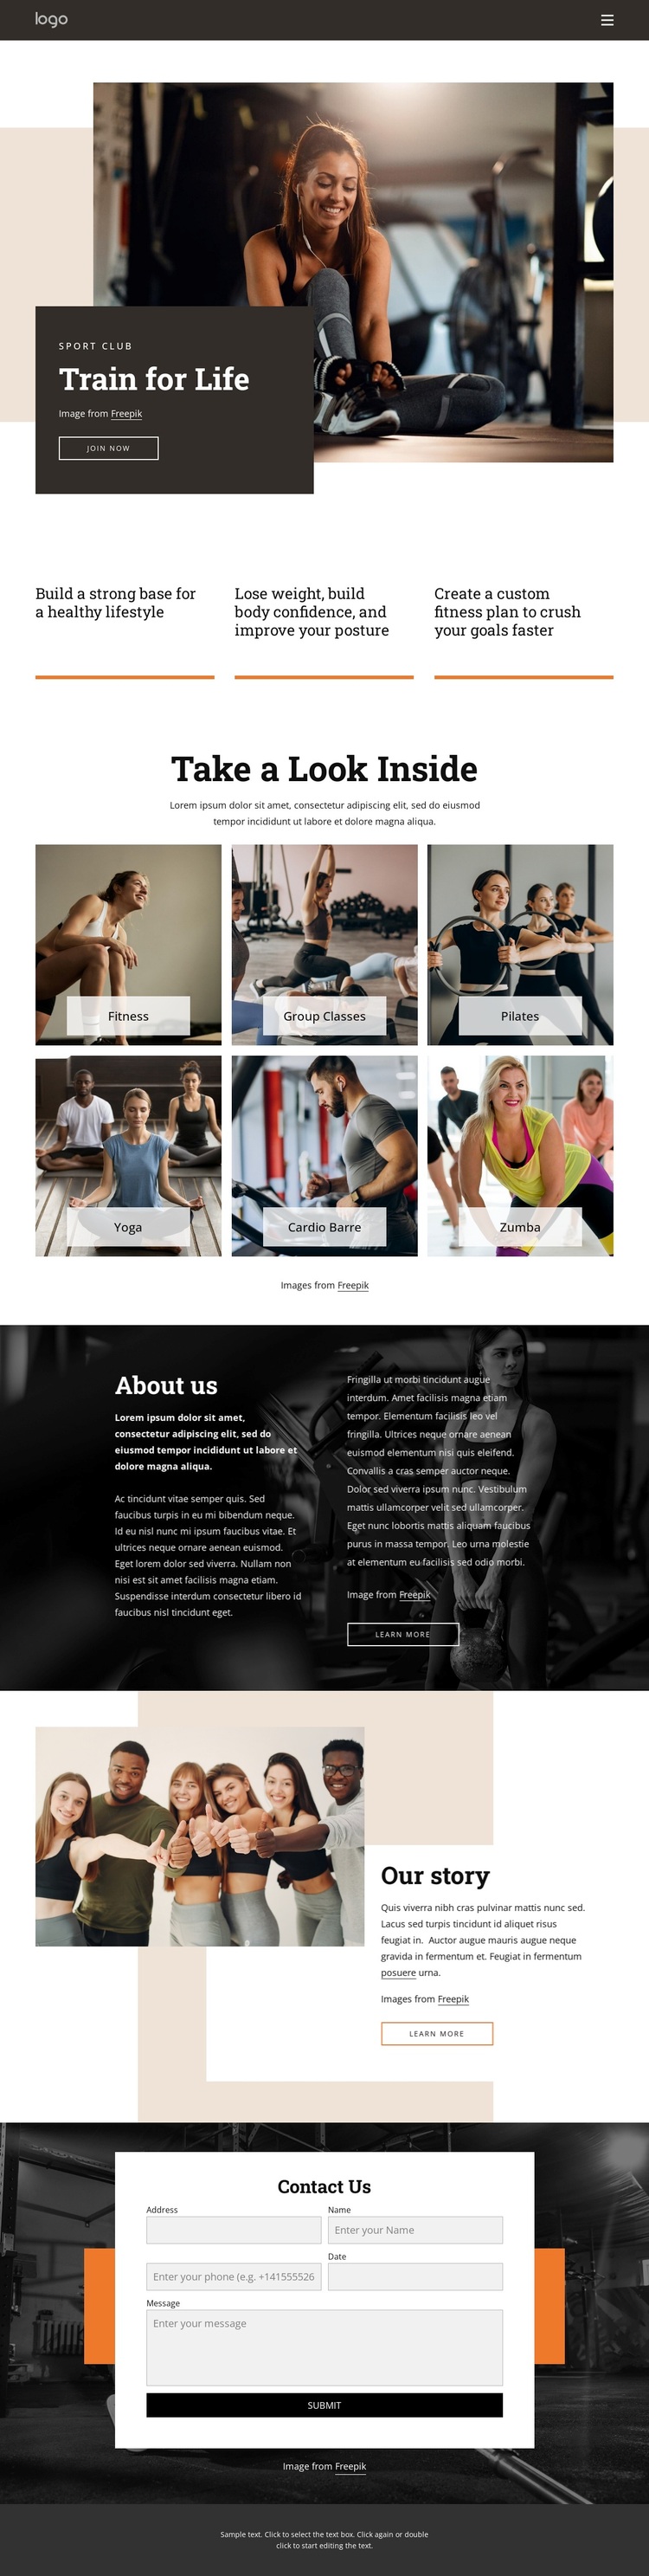 Get moving with our range of classes Template